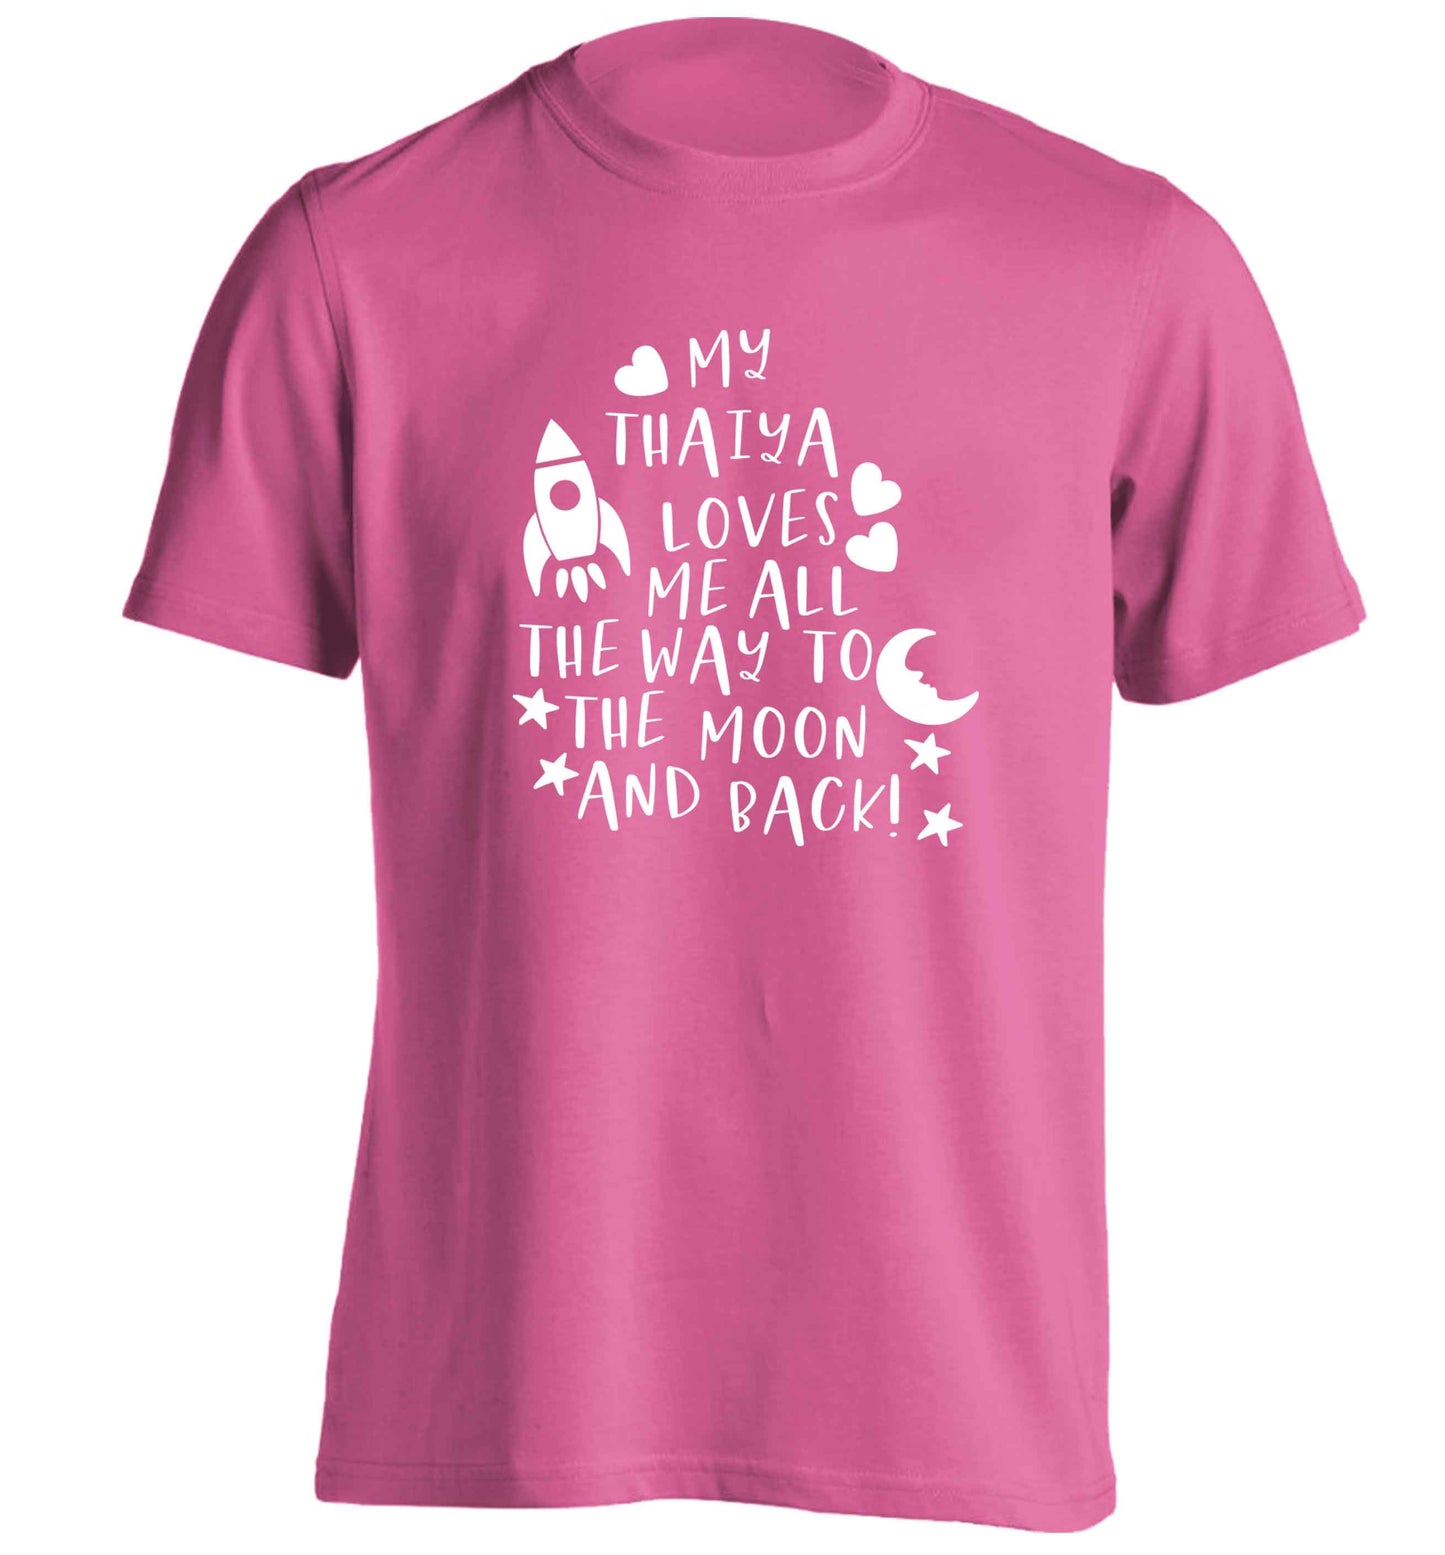 My thaiya loves me all the way to the moon and back adults unisex pink Tshirt 2XL